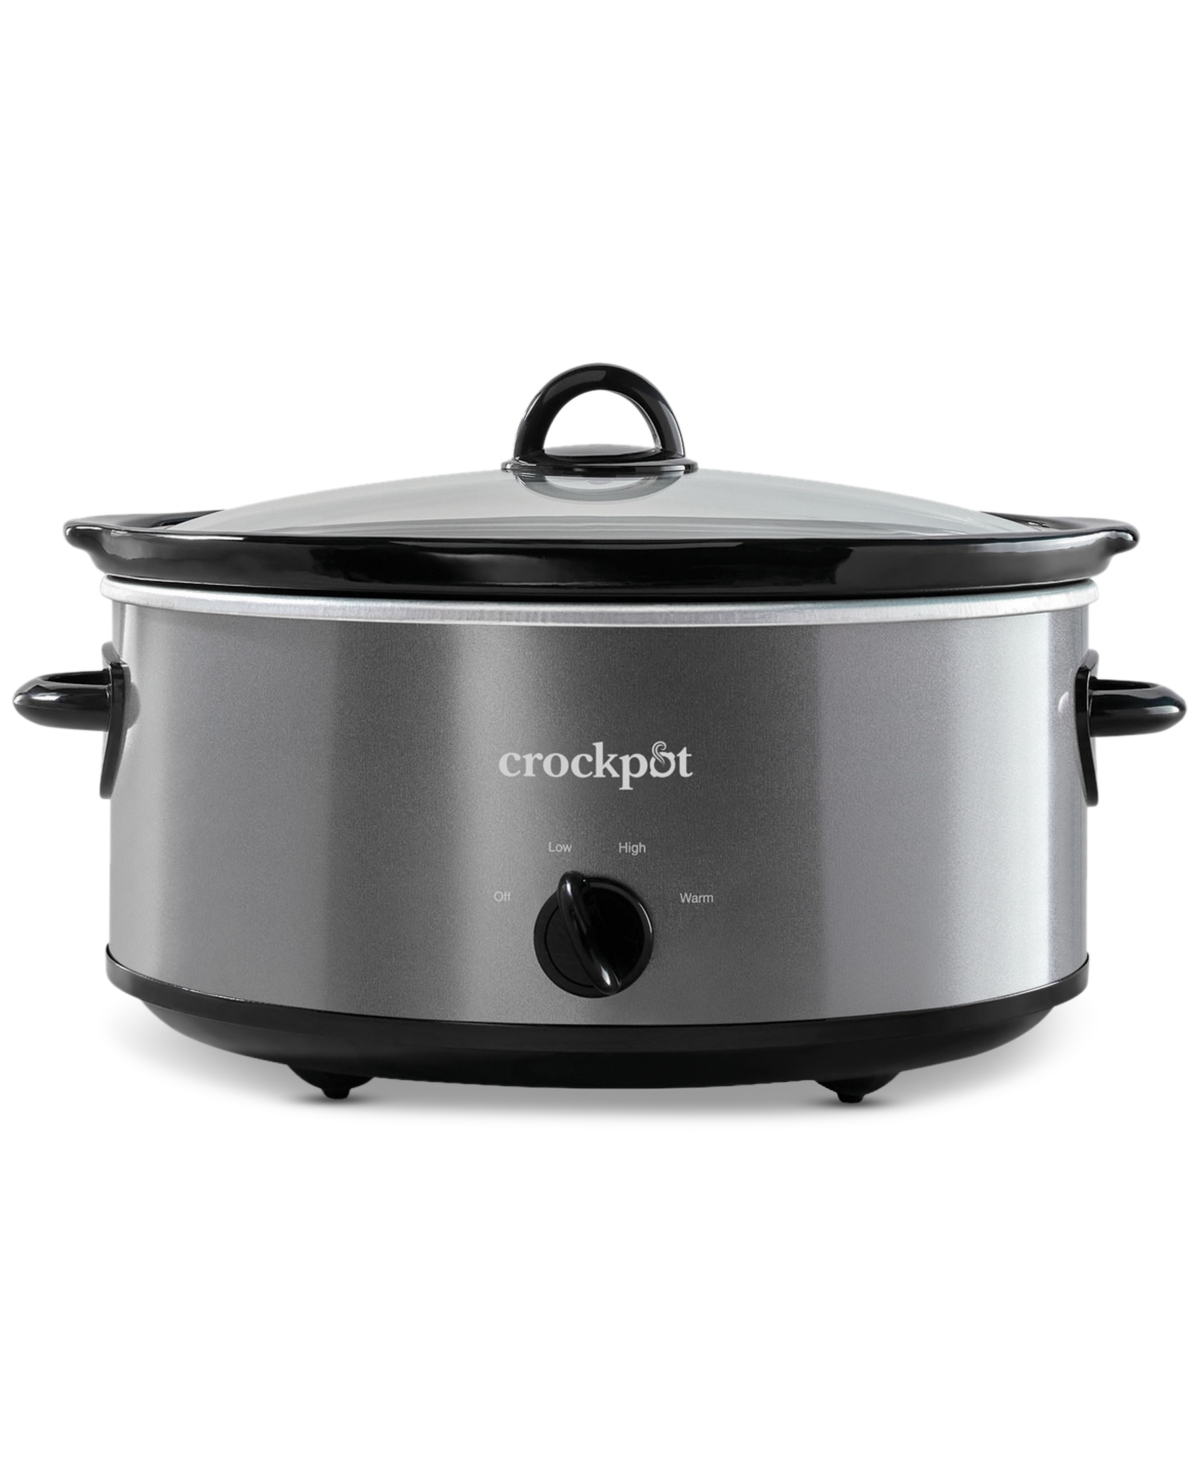 Crock-pot Design To Shine 7-qt. Manual Slow Cooker In Stainless Steel